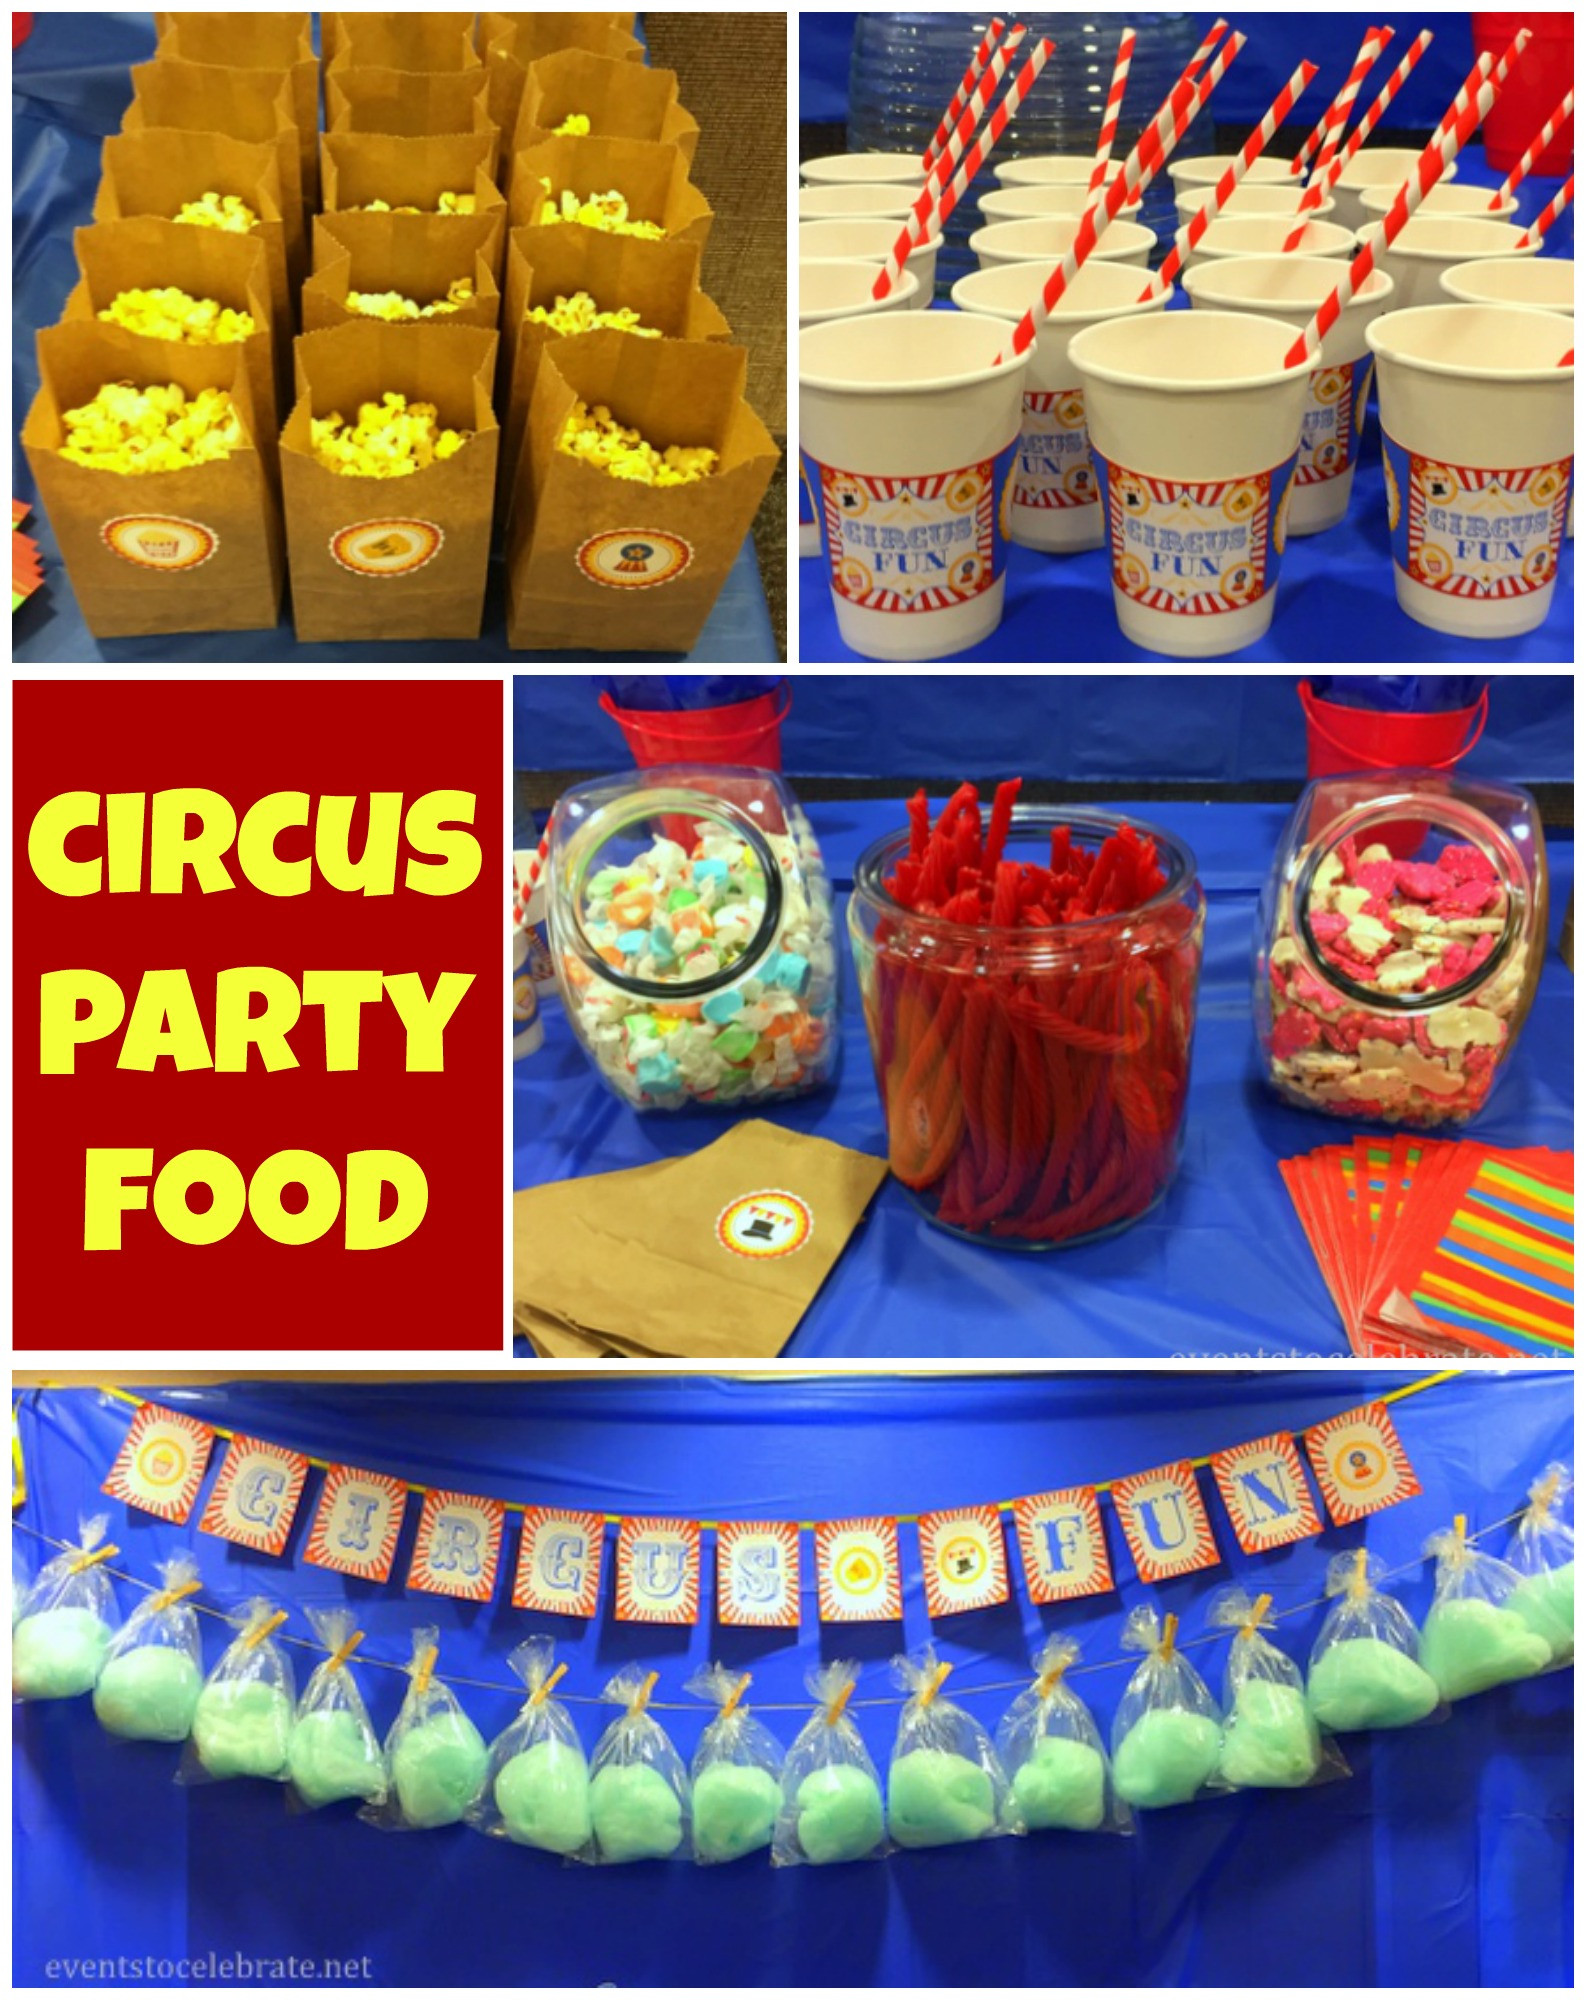 Circus Party Food Ideas
 Circus Carnival Party events to CELEBRATE